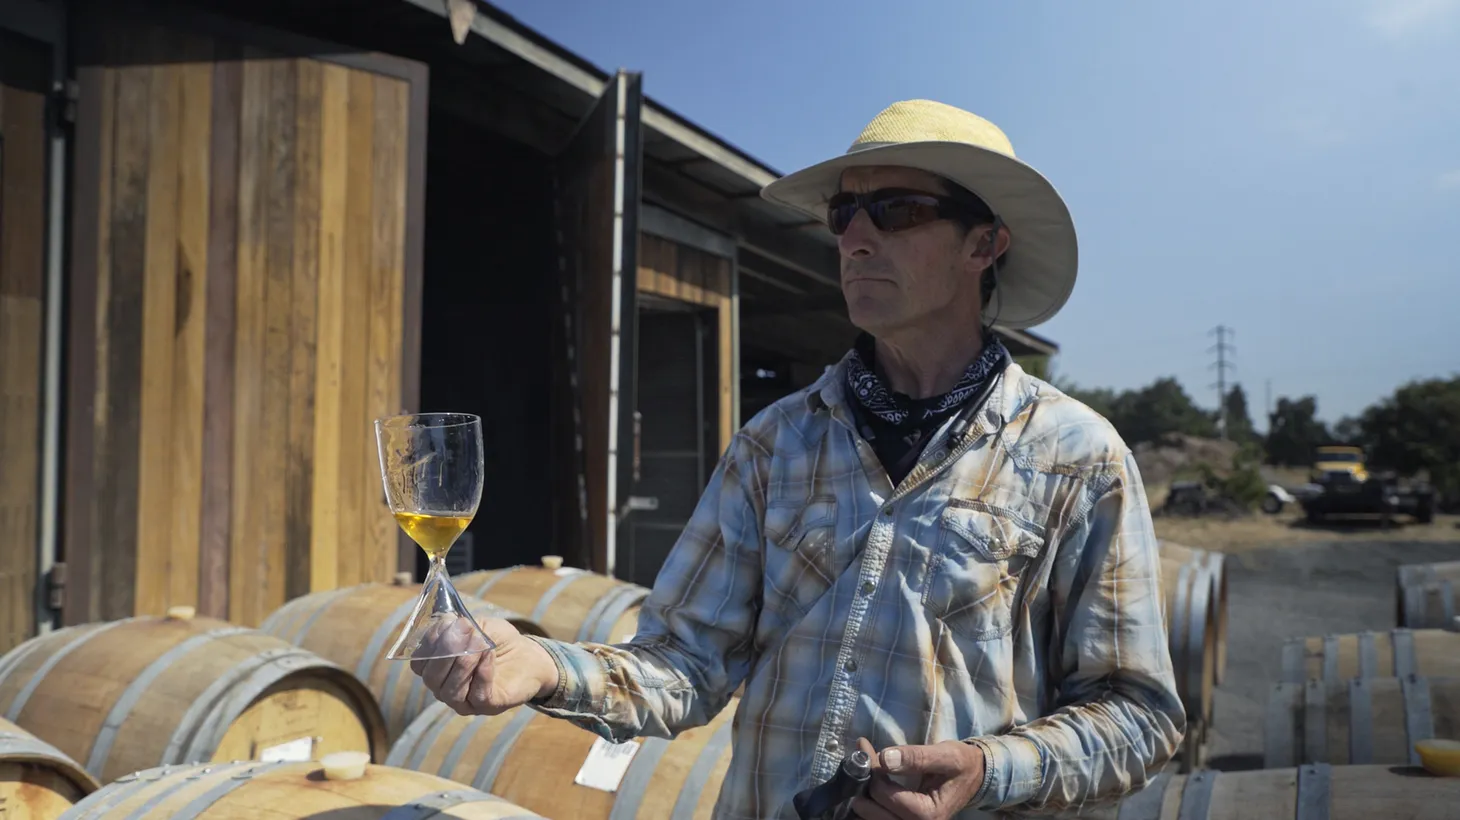 Natural winemakers, like Derrick Trowbridge of Old World Winery, oversee every aspect of the wine that they make, an accomplishment achieved without using chemicals or intervention.